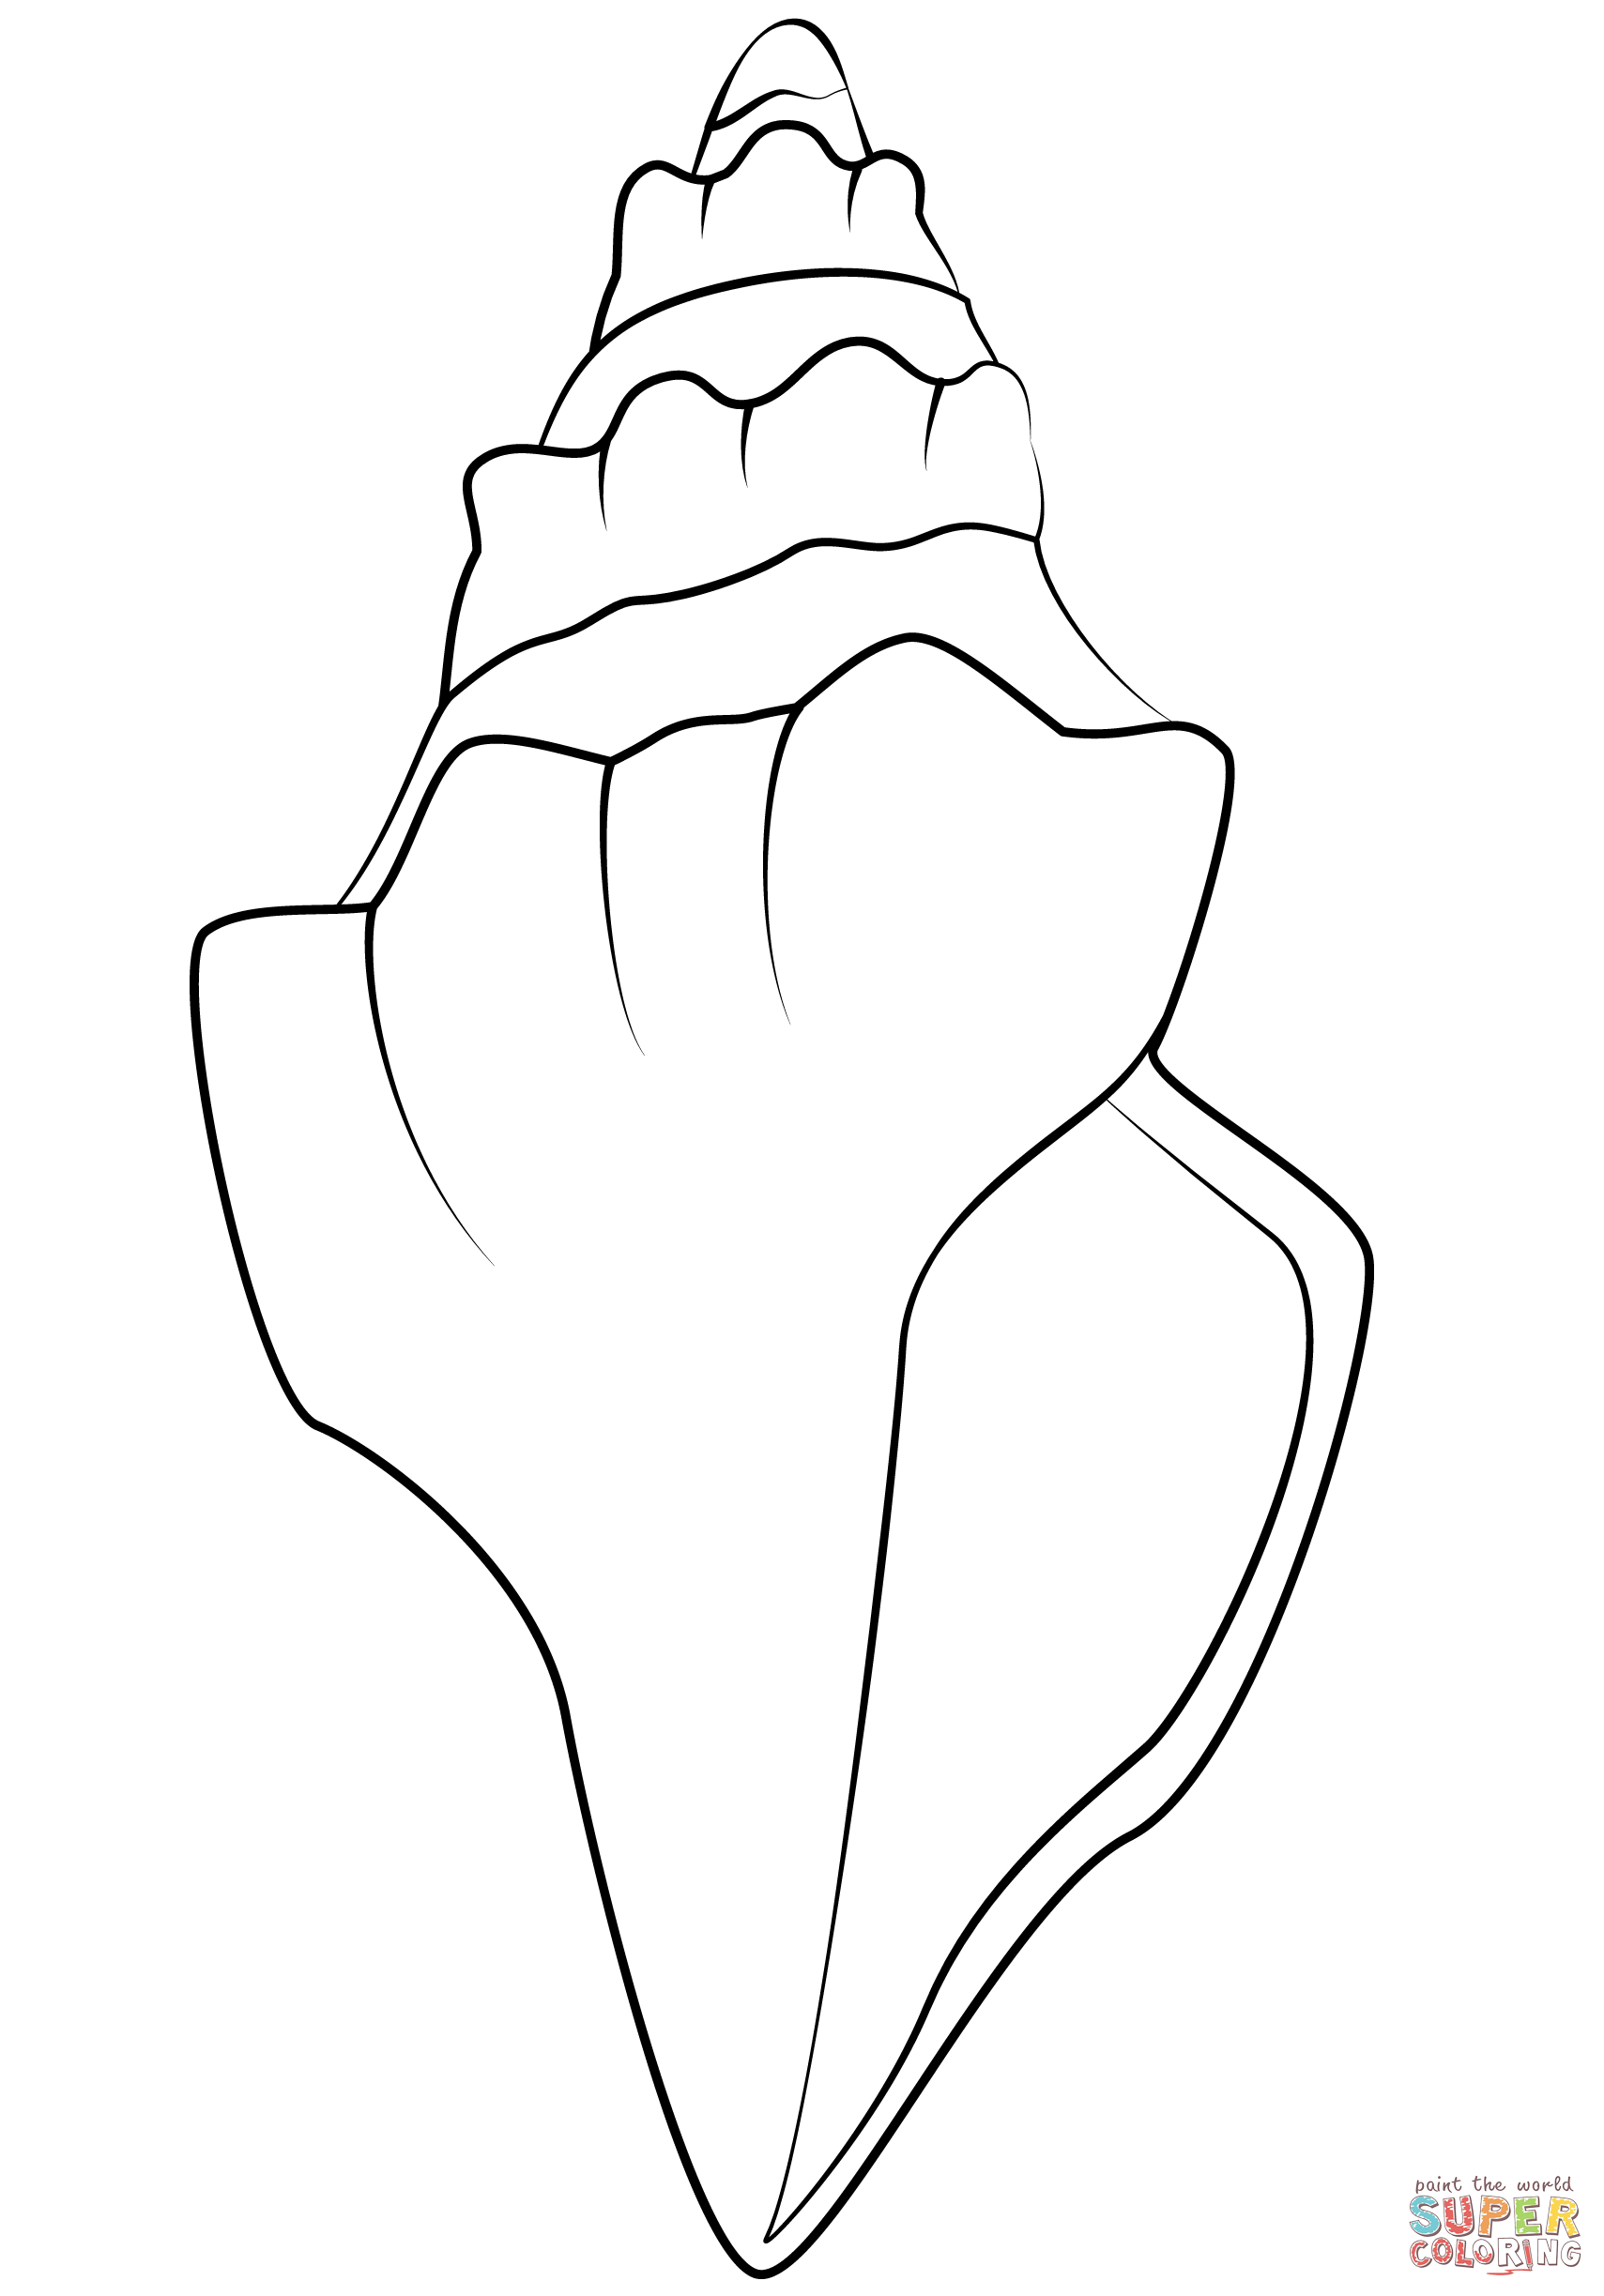 Seashell coloring page free printable coloring pages